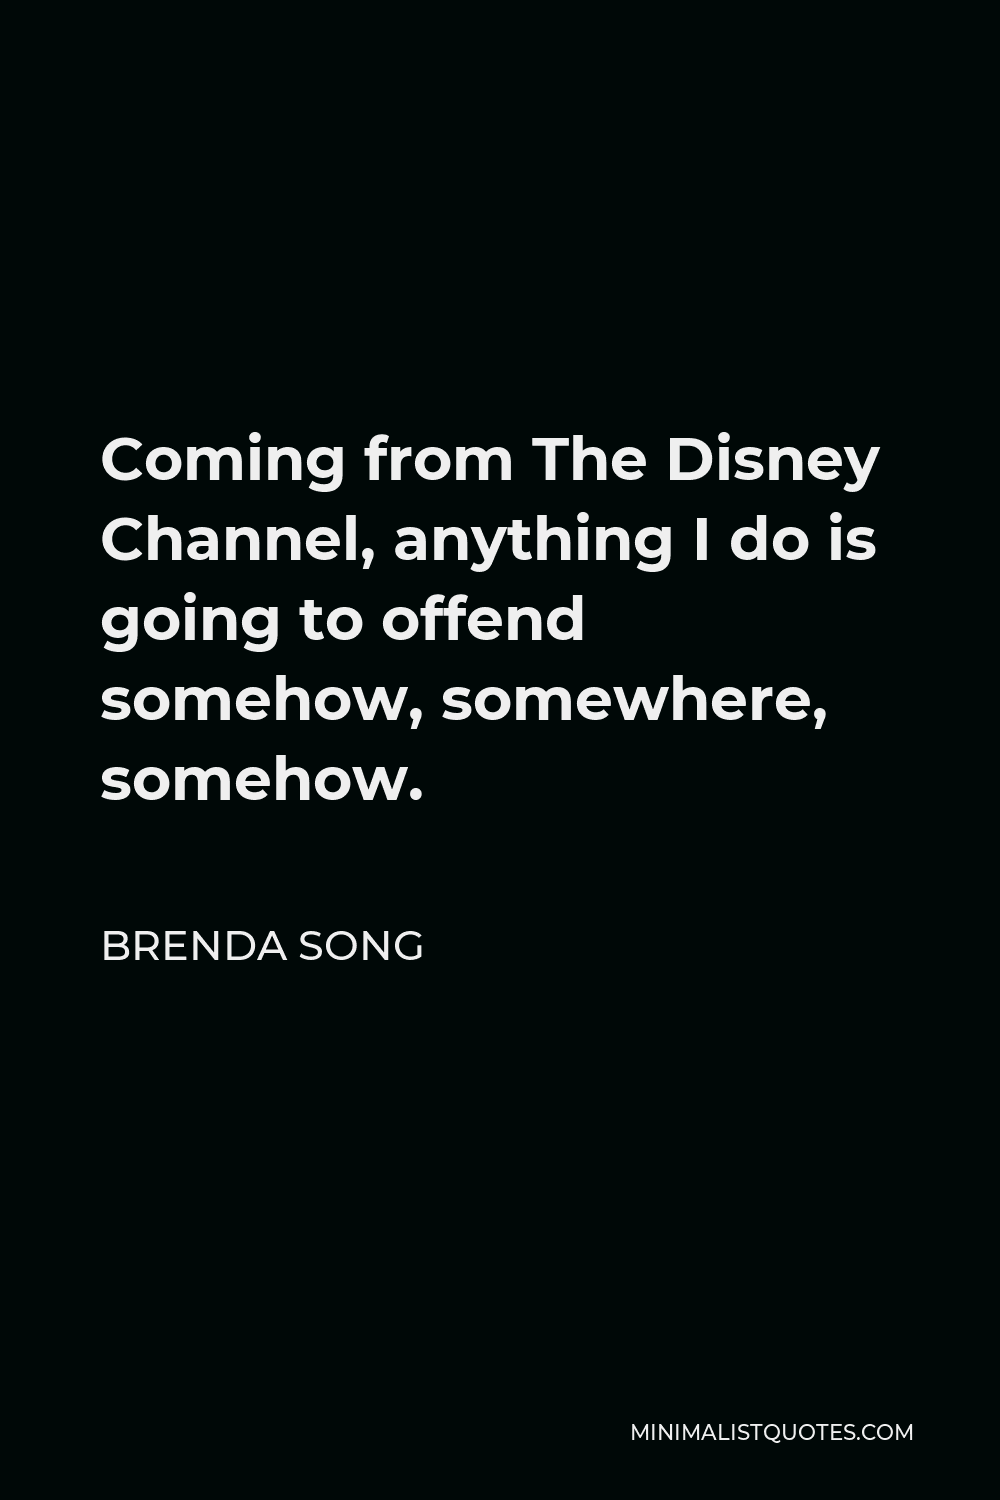 Brenda Song Quote - Coming from The Disney Channel, anything I do is going to offend somehow, somewhere, somehow.